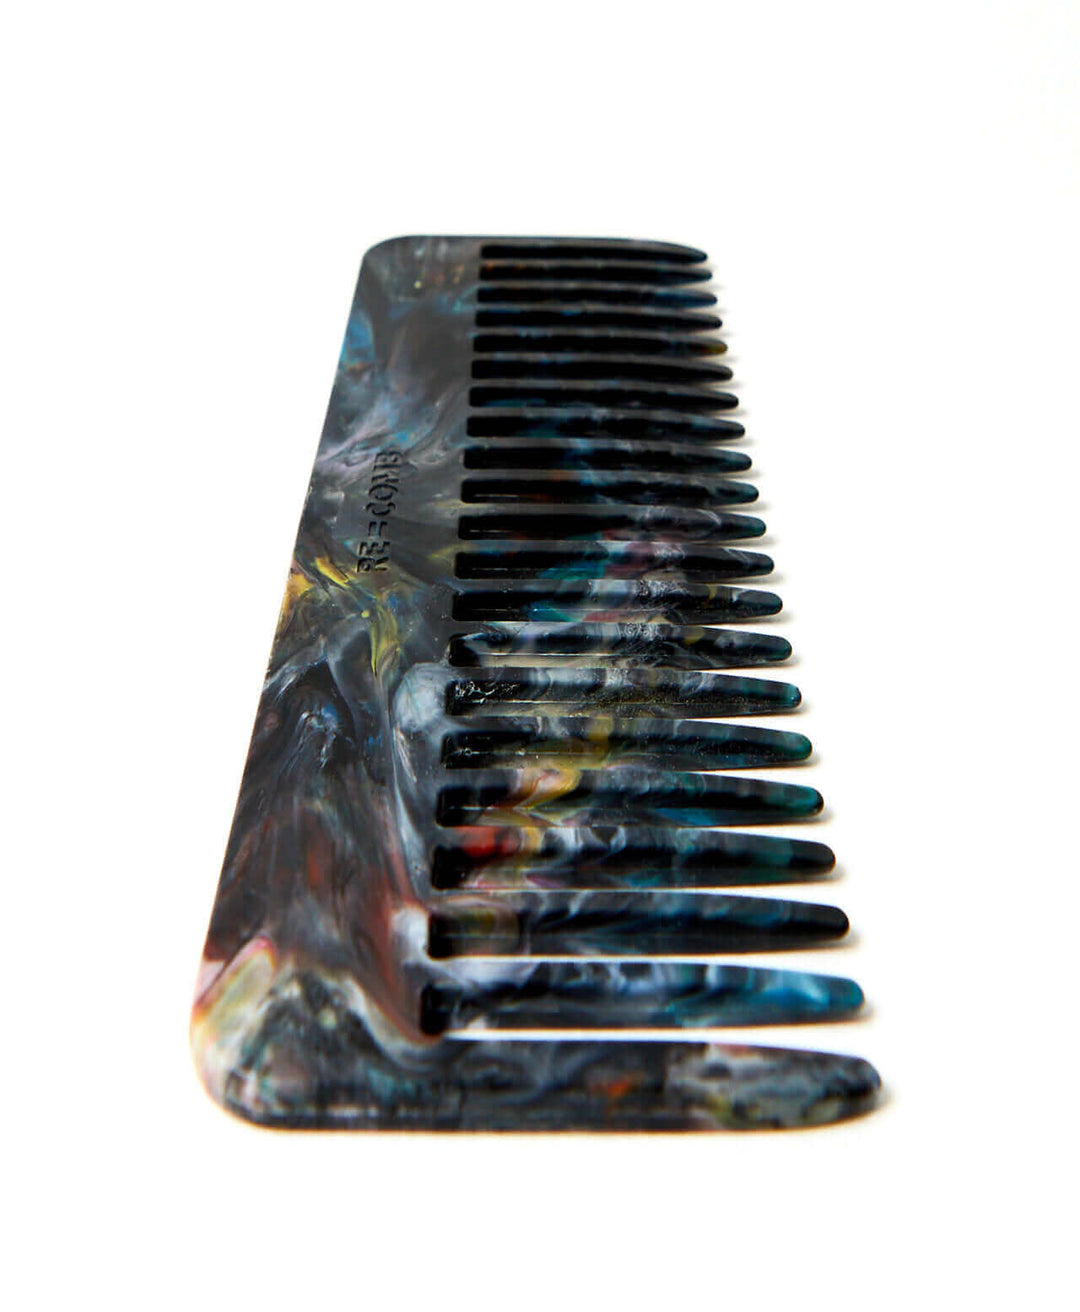 re-comb sustainable recycled hair combs